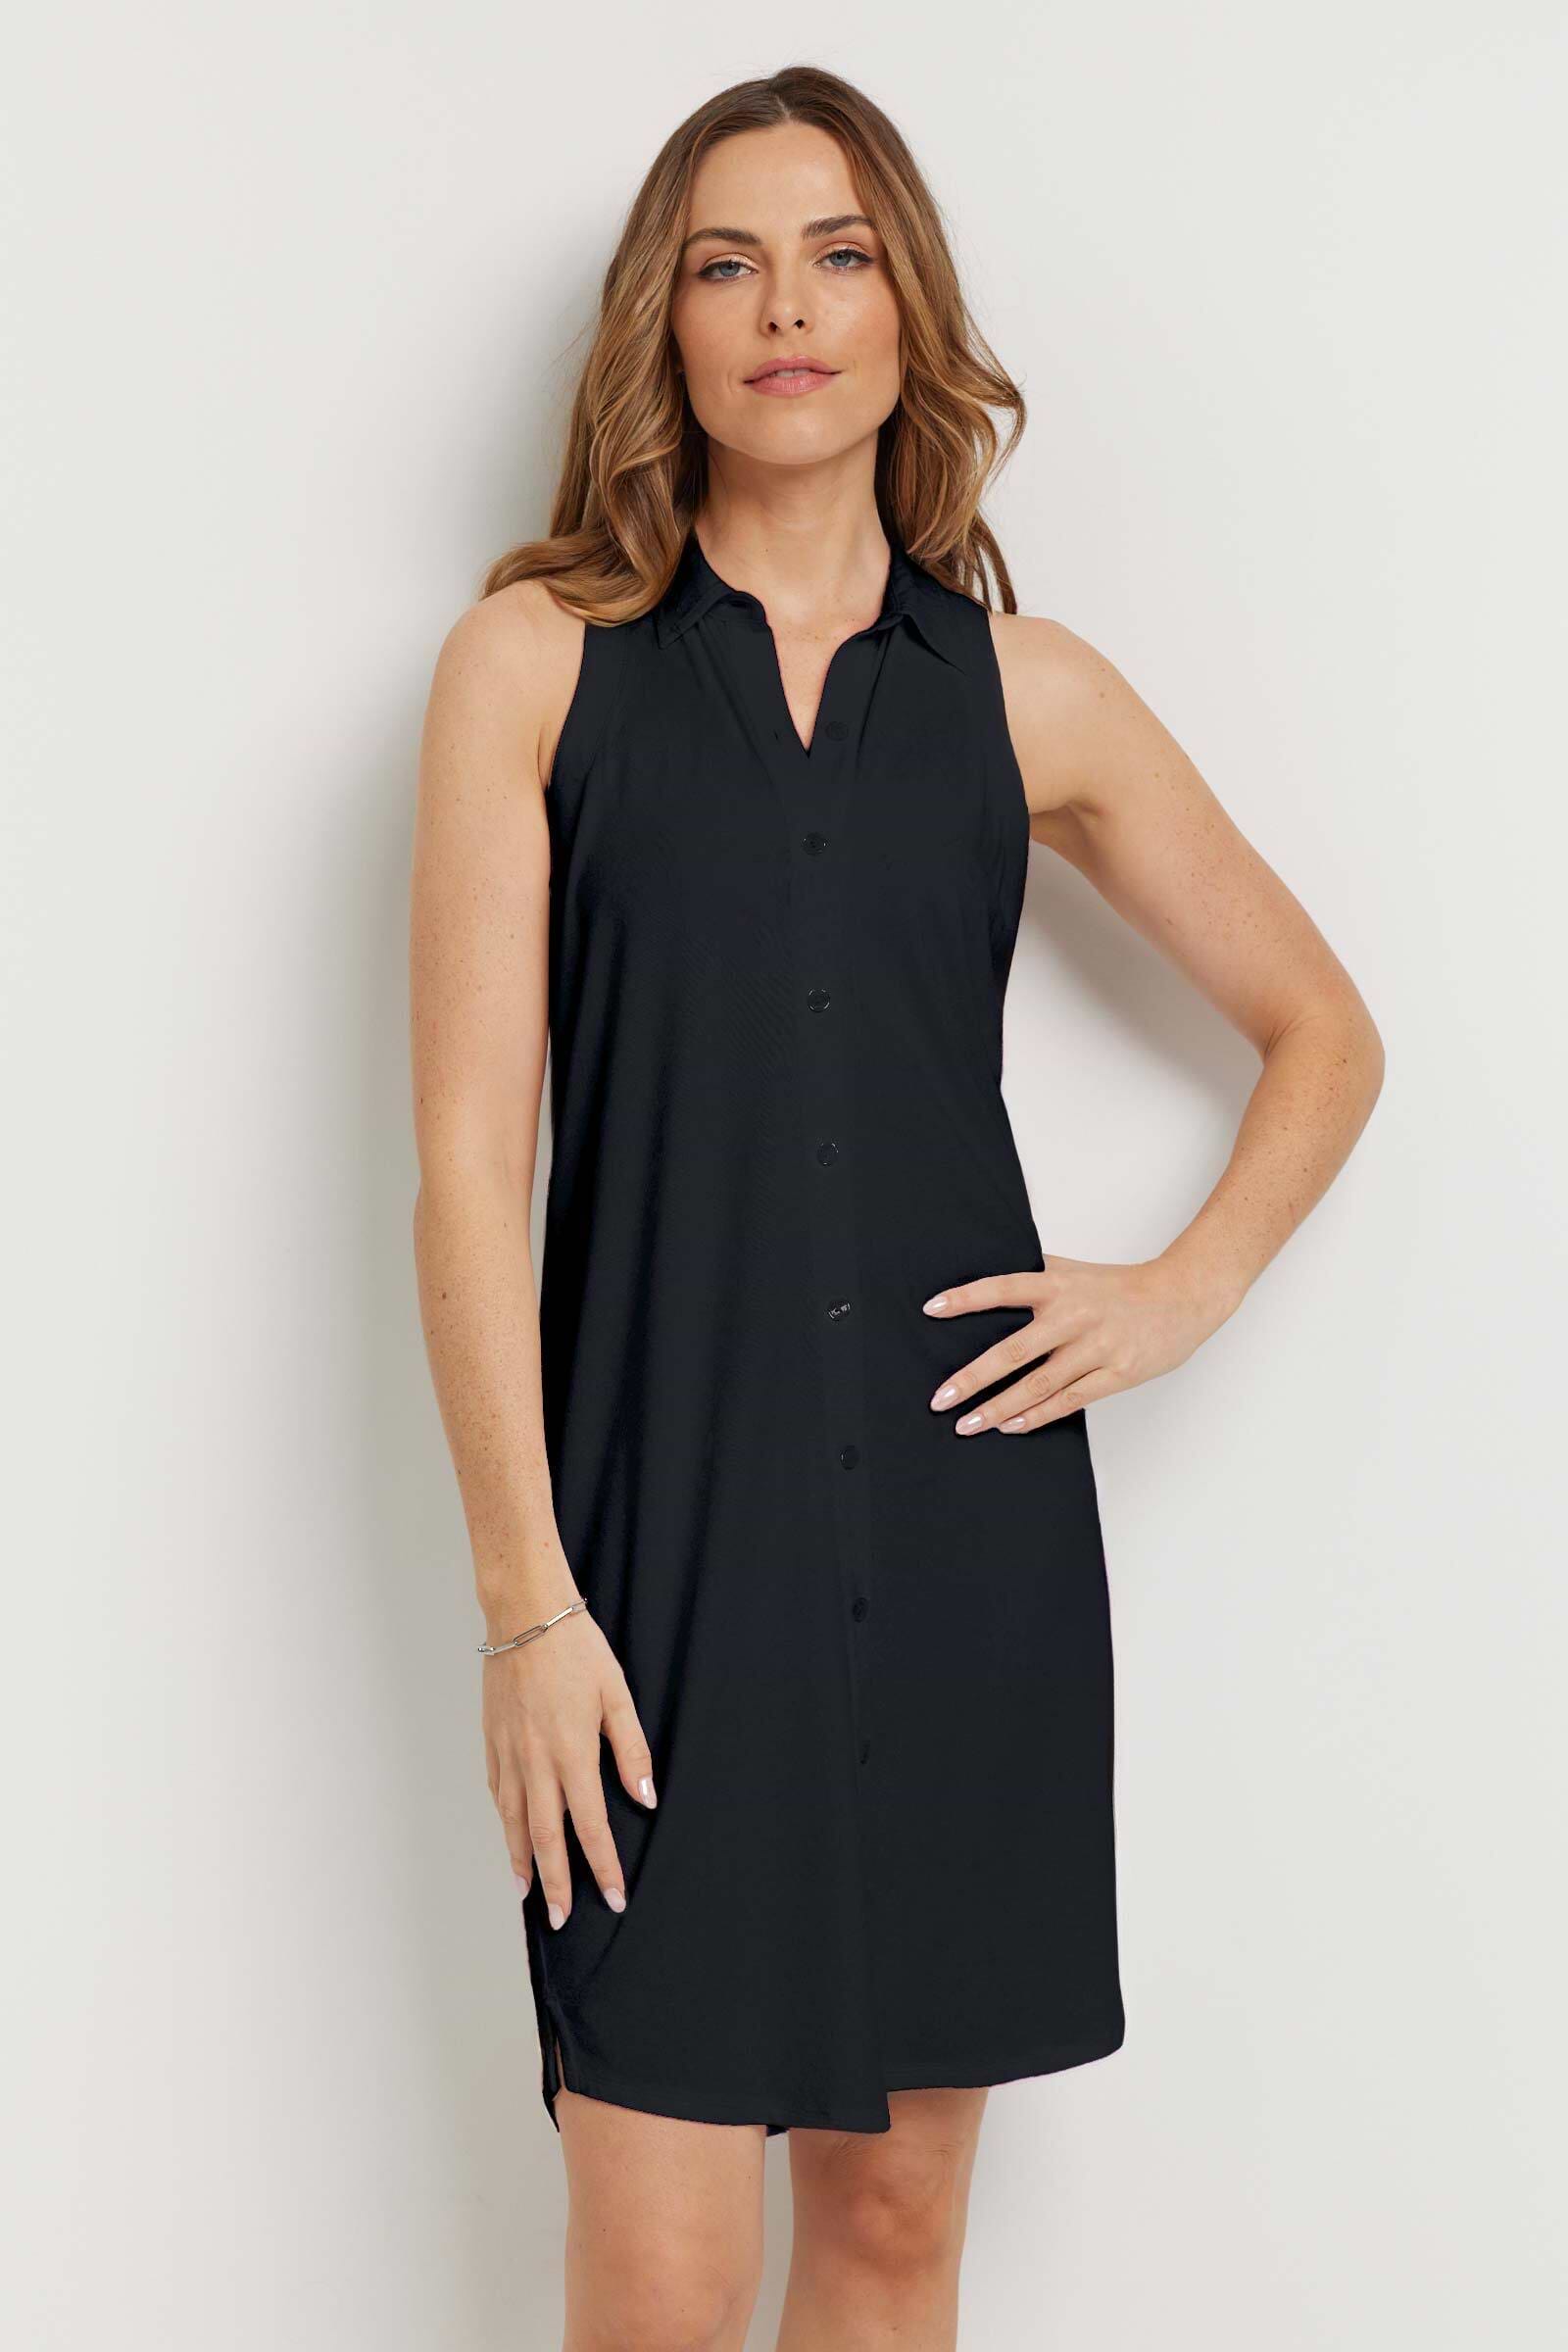 The Best Travel Dress. Woman Showing the Front Profile of an Elise Dress in Black